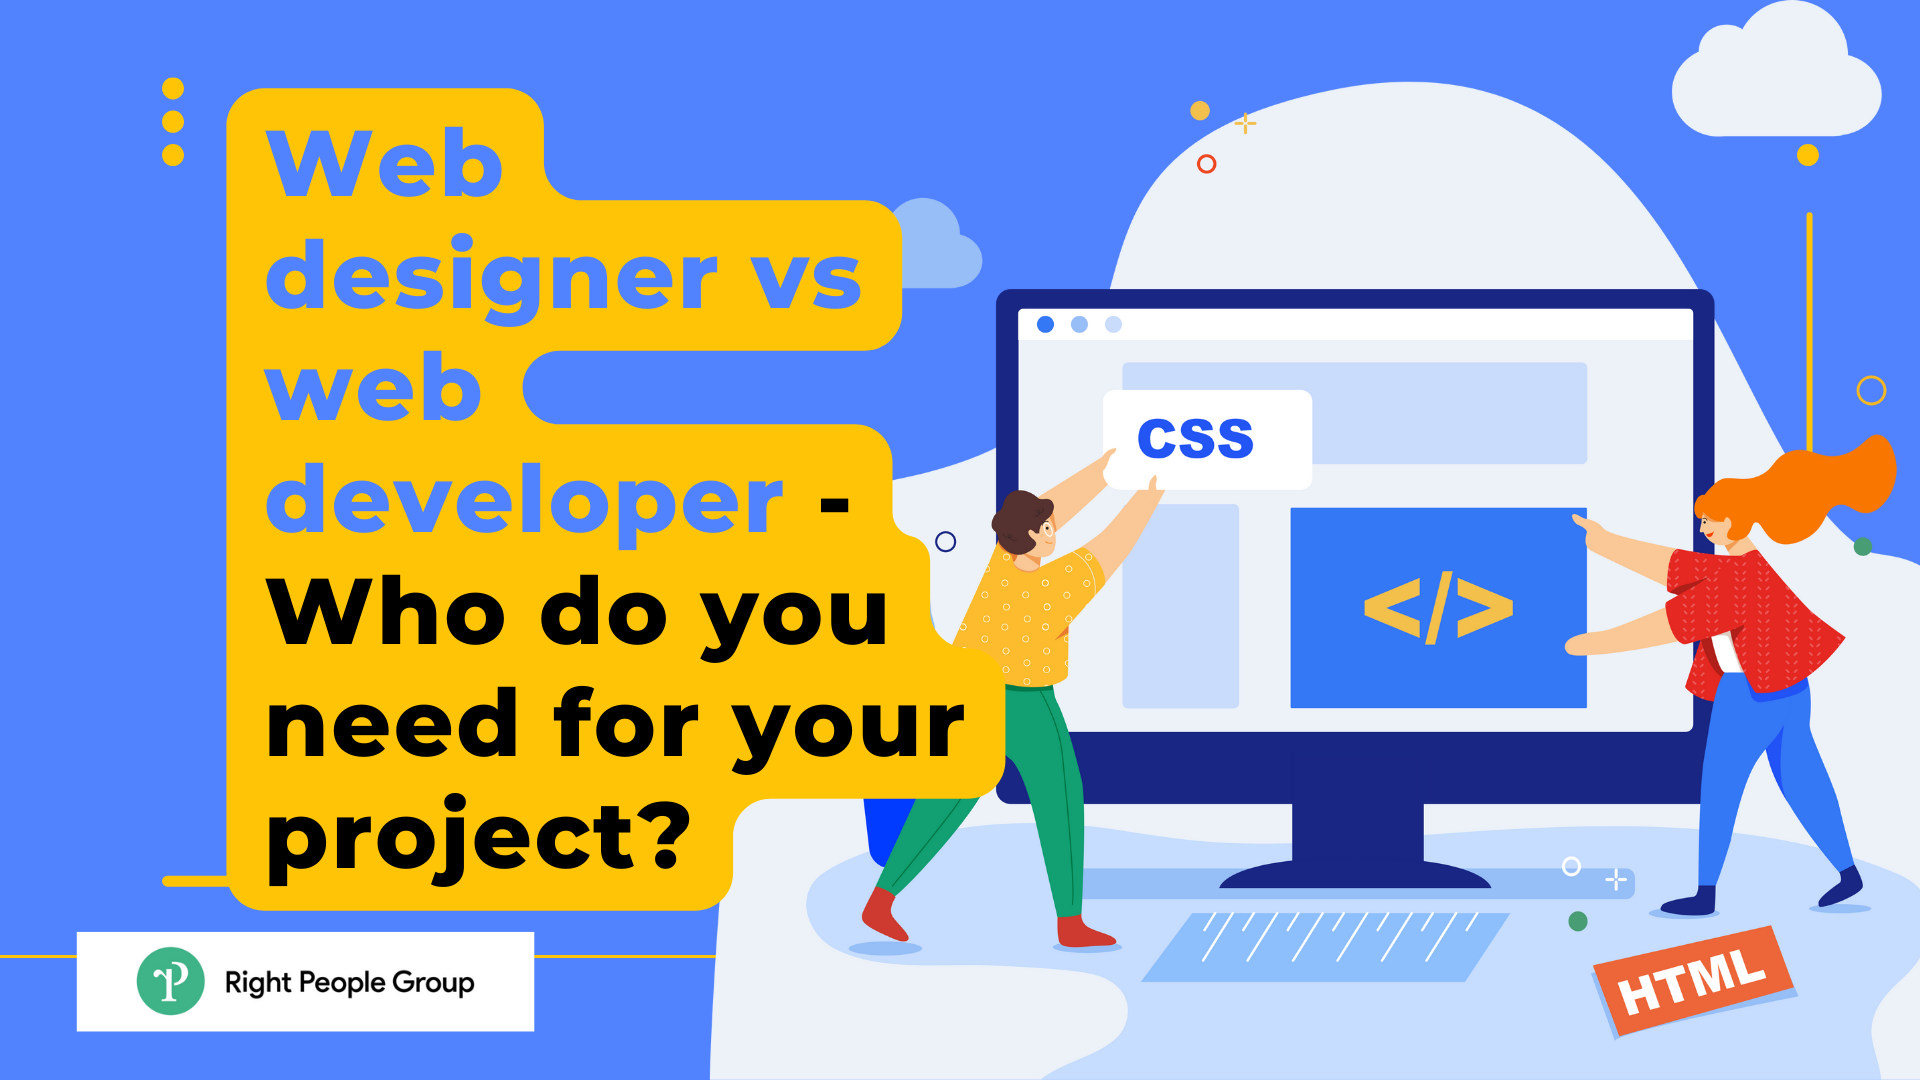 Web designer vs web developer – Who do you need for your project?